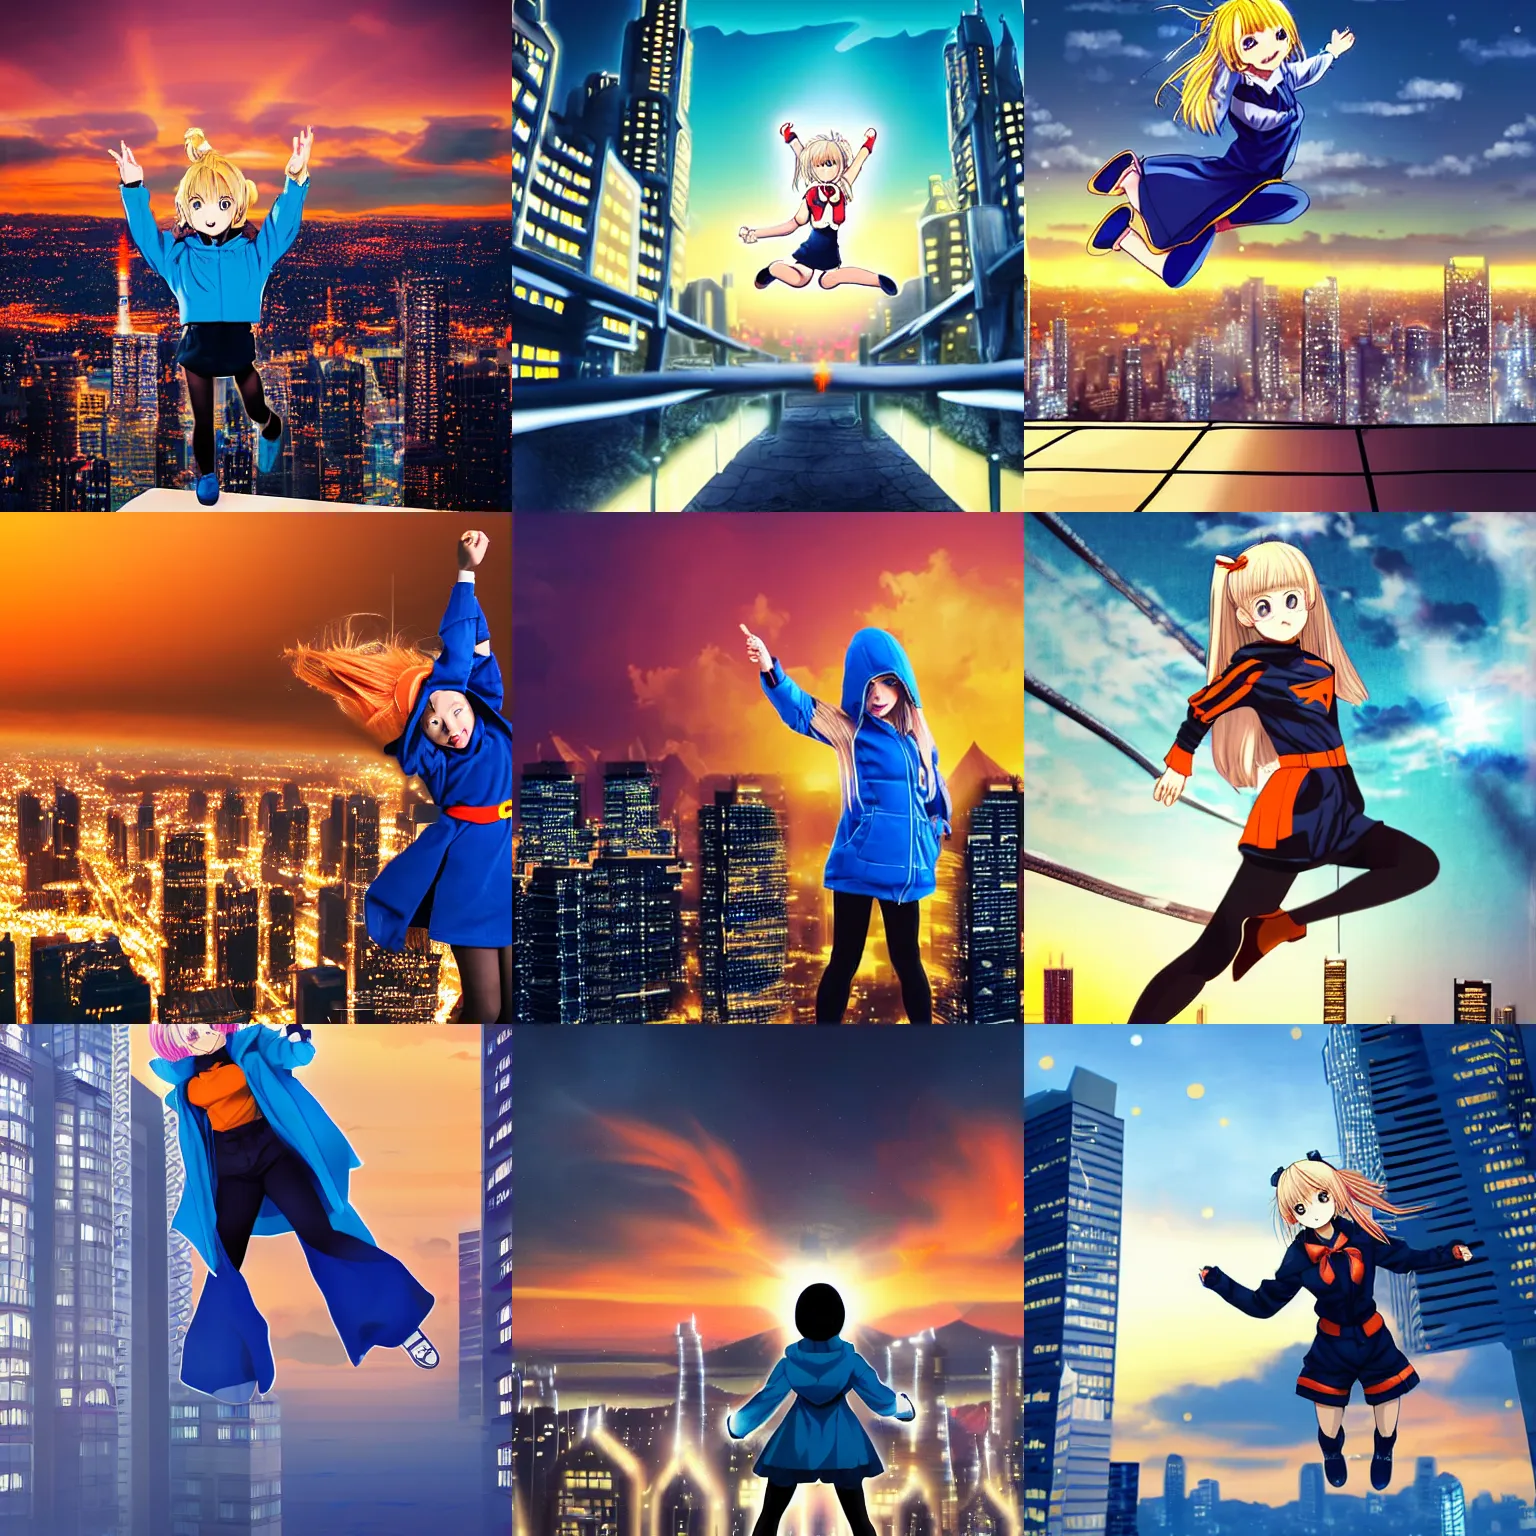 Prompt: A cute manga girl with blond hair and cute pigtails is wearing a blue coat with a hood and black shorts. She is jumping from the tallest building of a big modern city full of lights, doing a superhero pose. The background is an amazing hyper-realistic cinematic scene of sunset with astonishing but faint orange light.